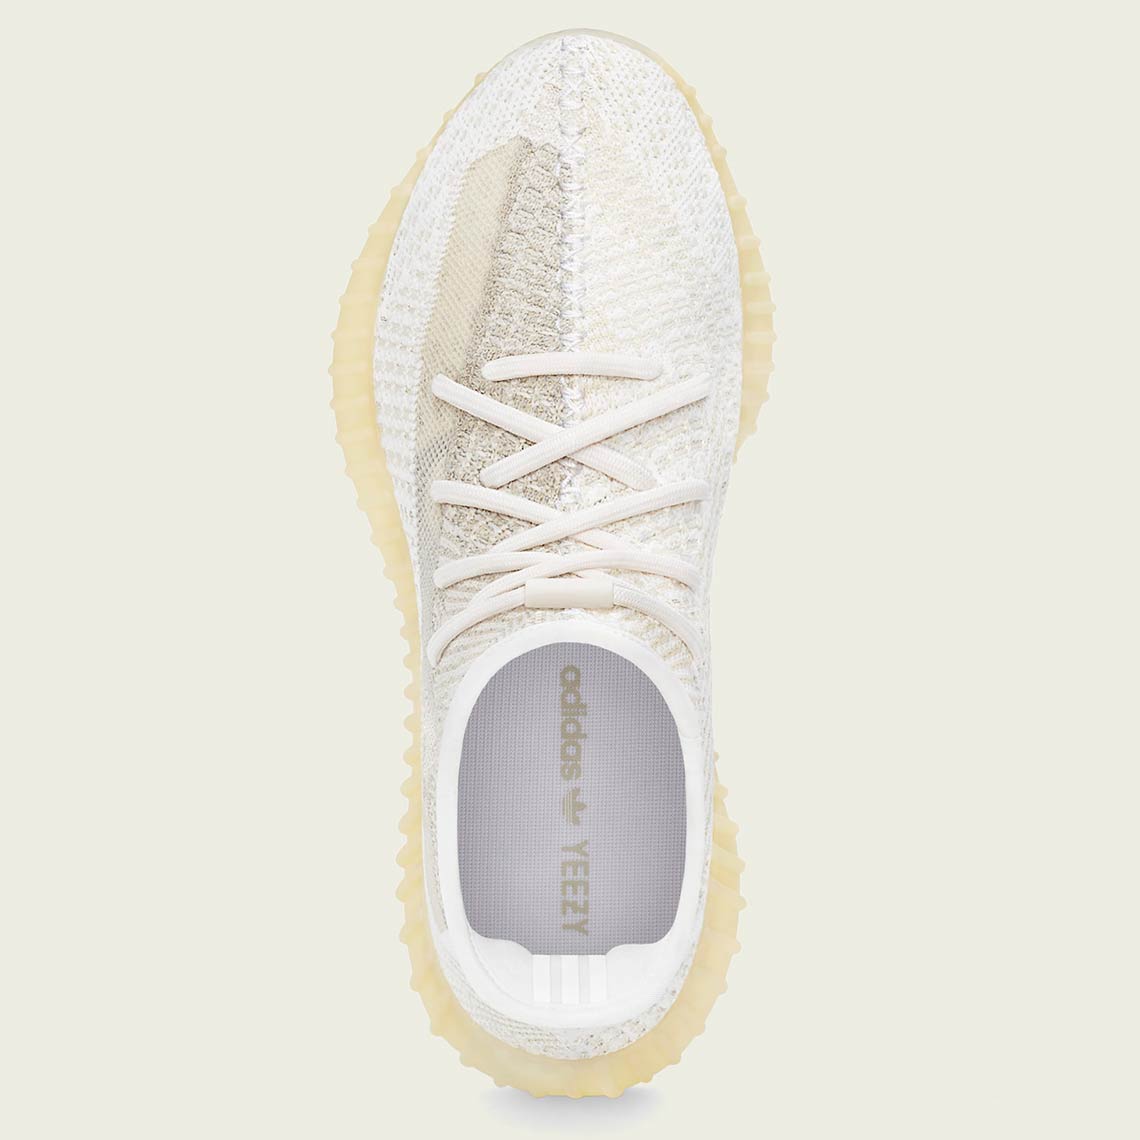 Adidas Yeezy Boost 350 V2 Natural Fz5246 Release Date 3